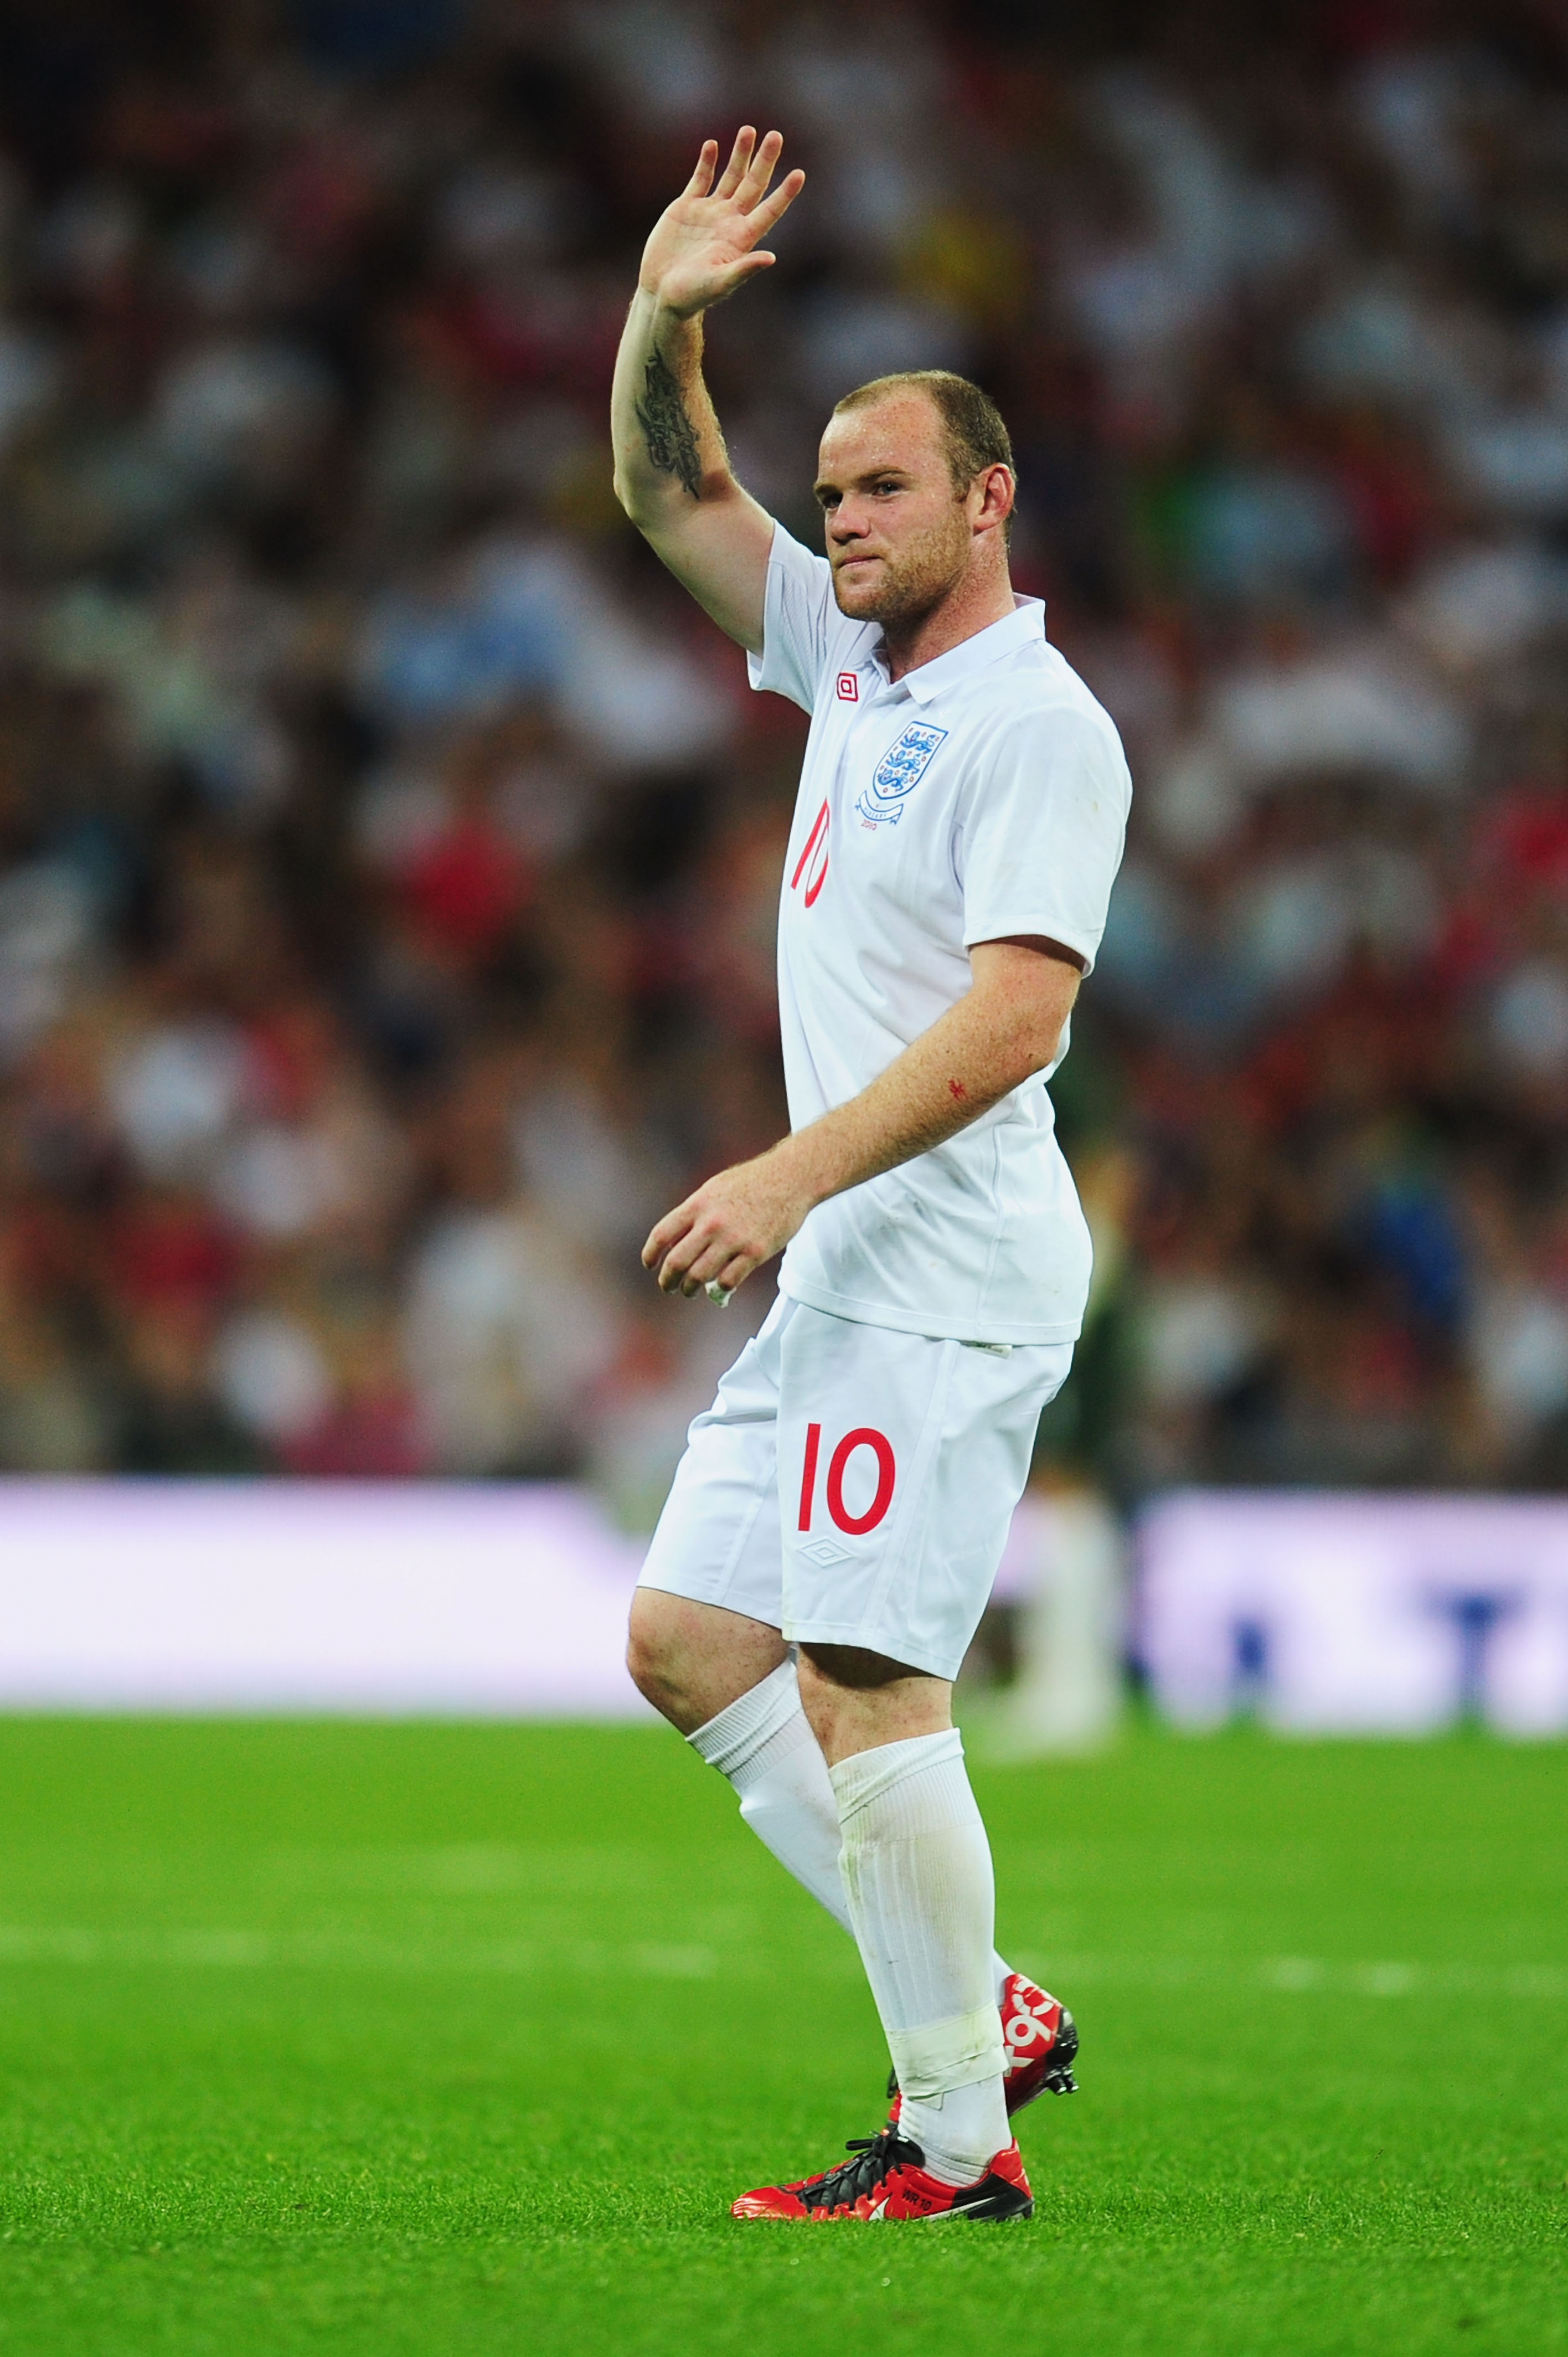 LONDON, ENGLAND - AUGUST 11:  Wayne Rooney of England waves to the fans as he is substituted during the International Friendly match between England and Hungary at Wembley Stadium on August 11, 2010 in London, England.  (Photo by Mike Hewitt/Getty Images)